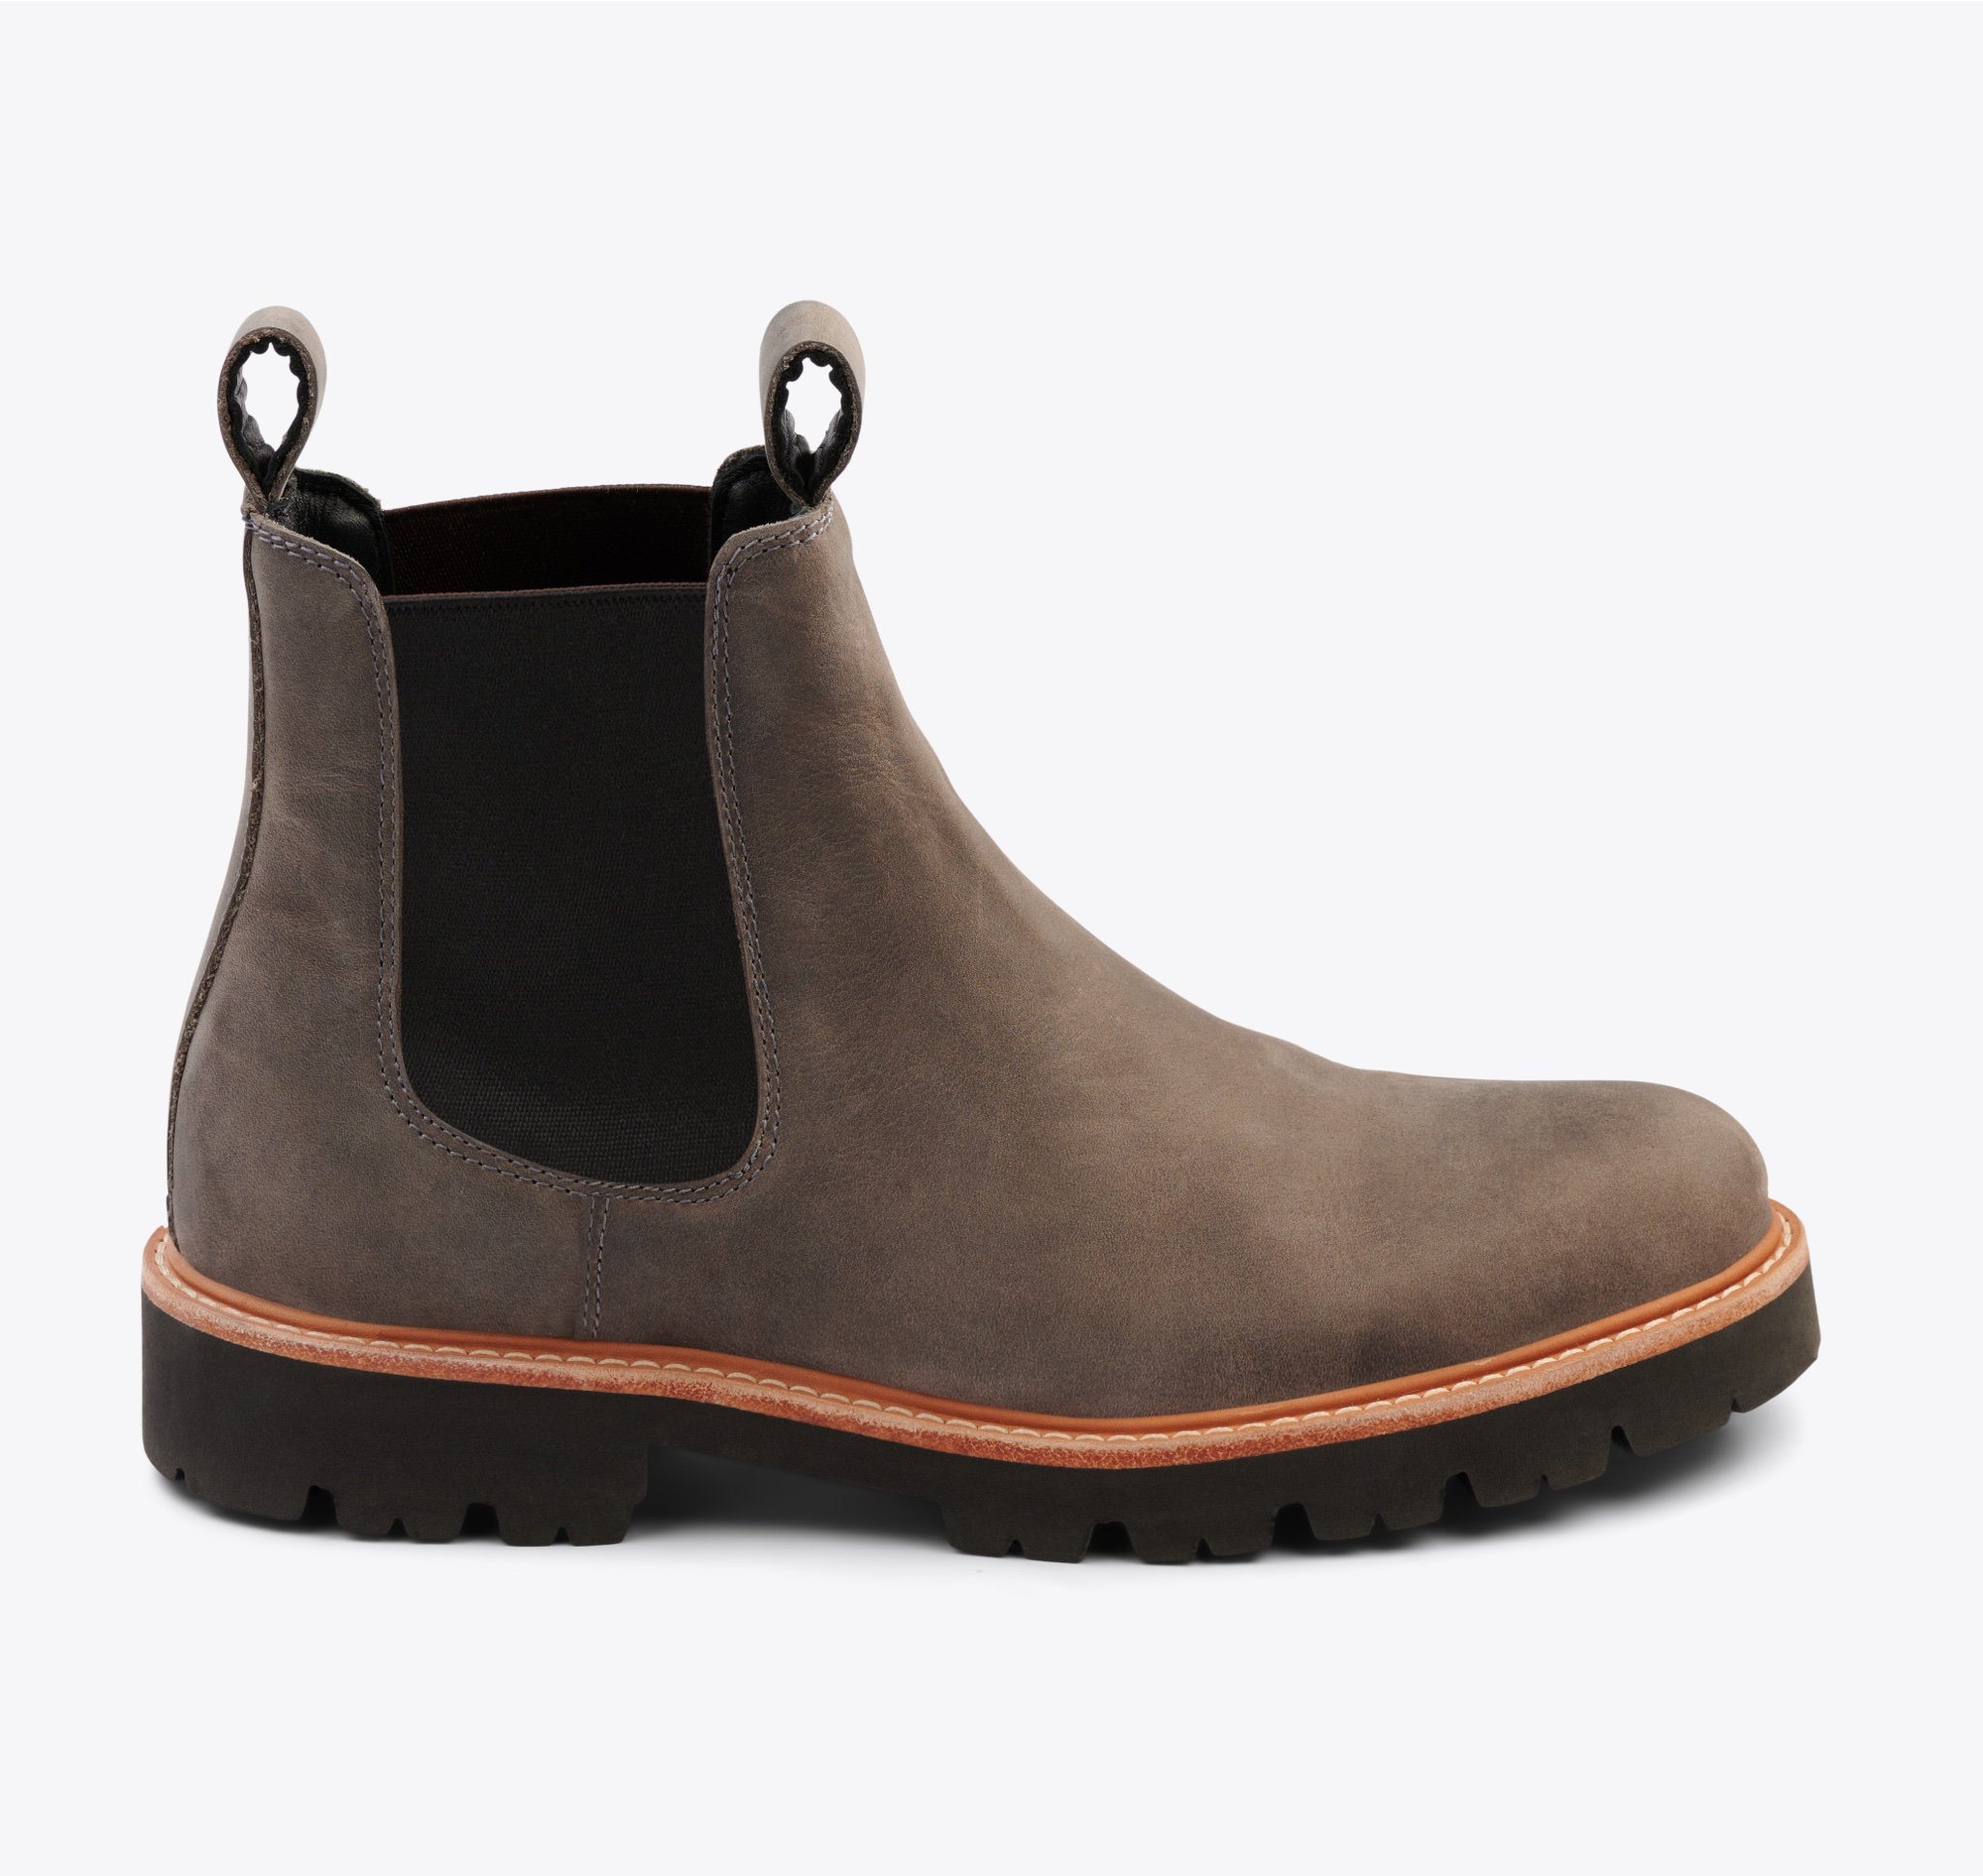 Nisolo Go-To Lug Chelsea Boot Grey - Every Nisolo product is built on the foundation of comfort, function, and design. 